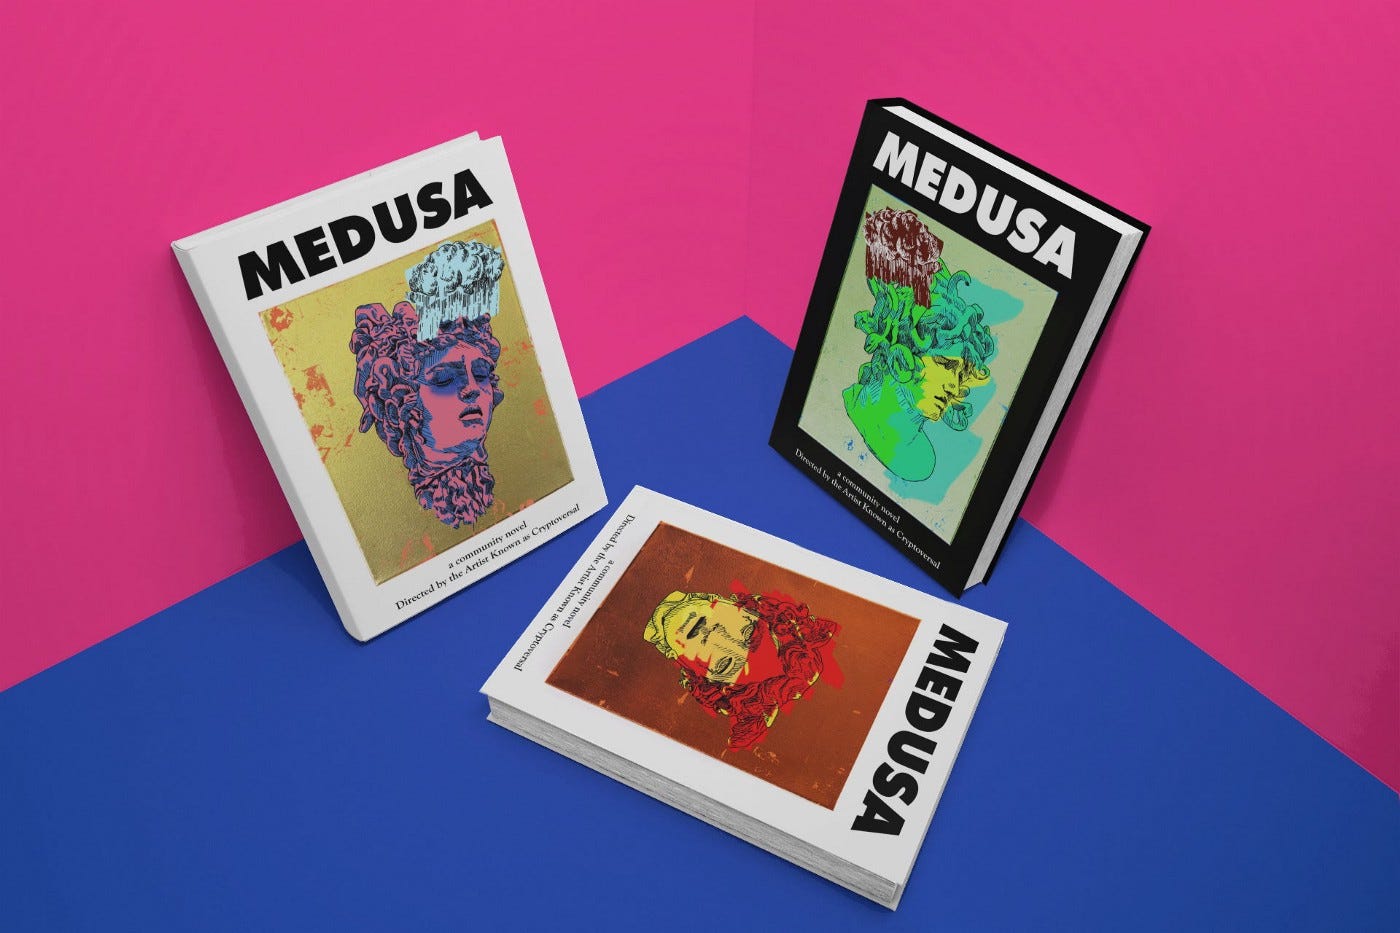 Three mock-ups of a Medusa novel with alternate covers against a colorful background.